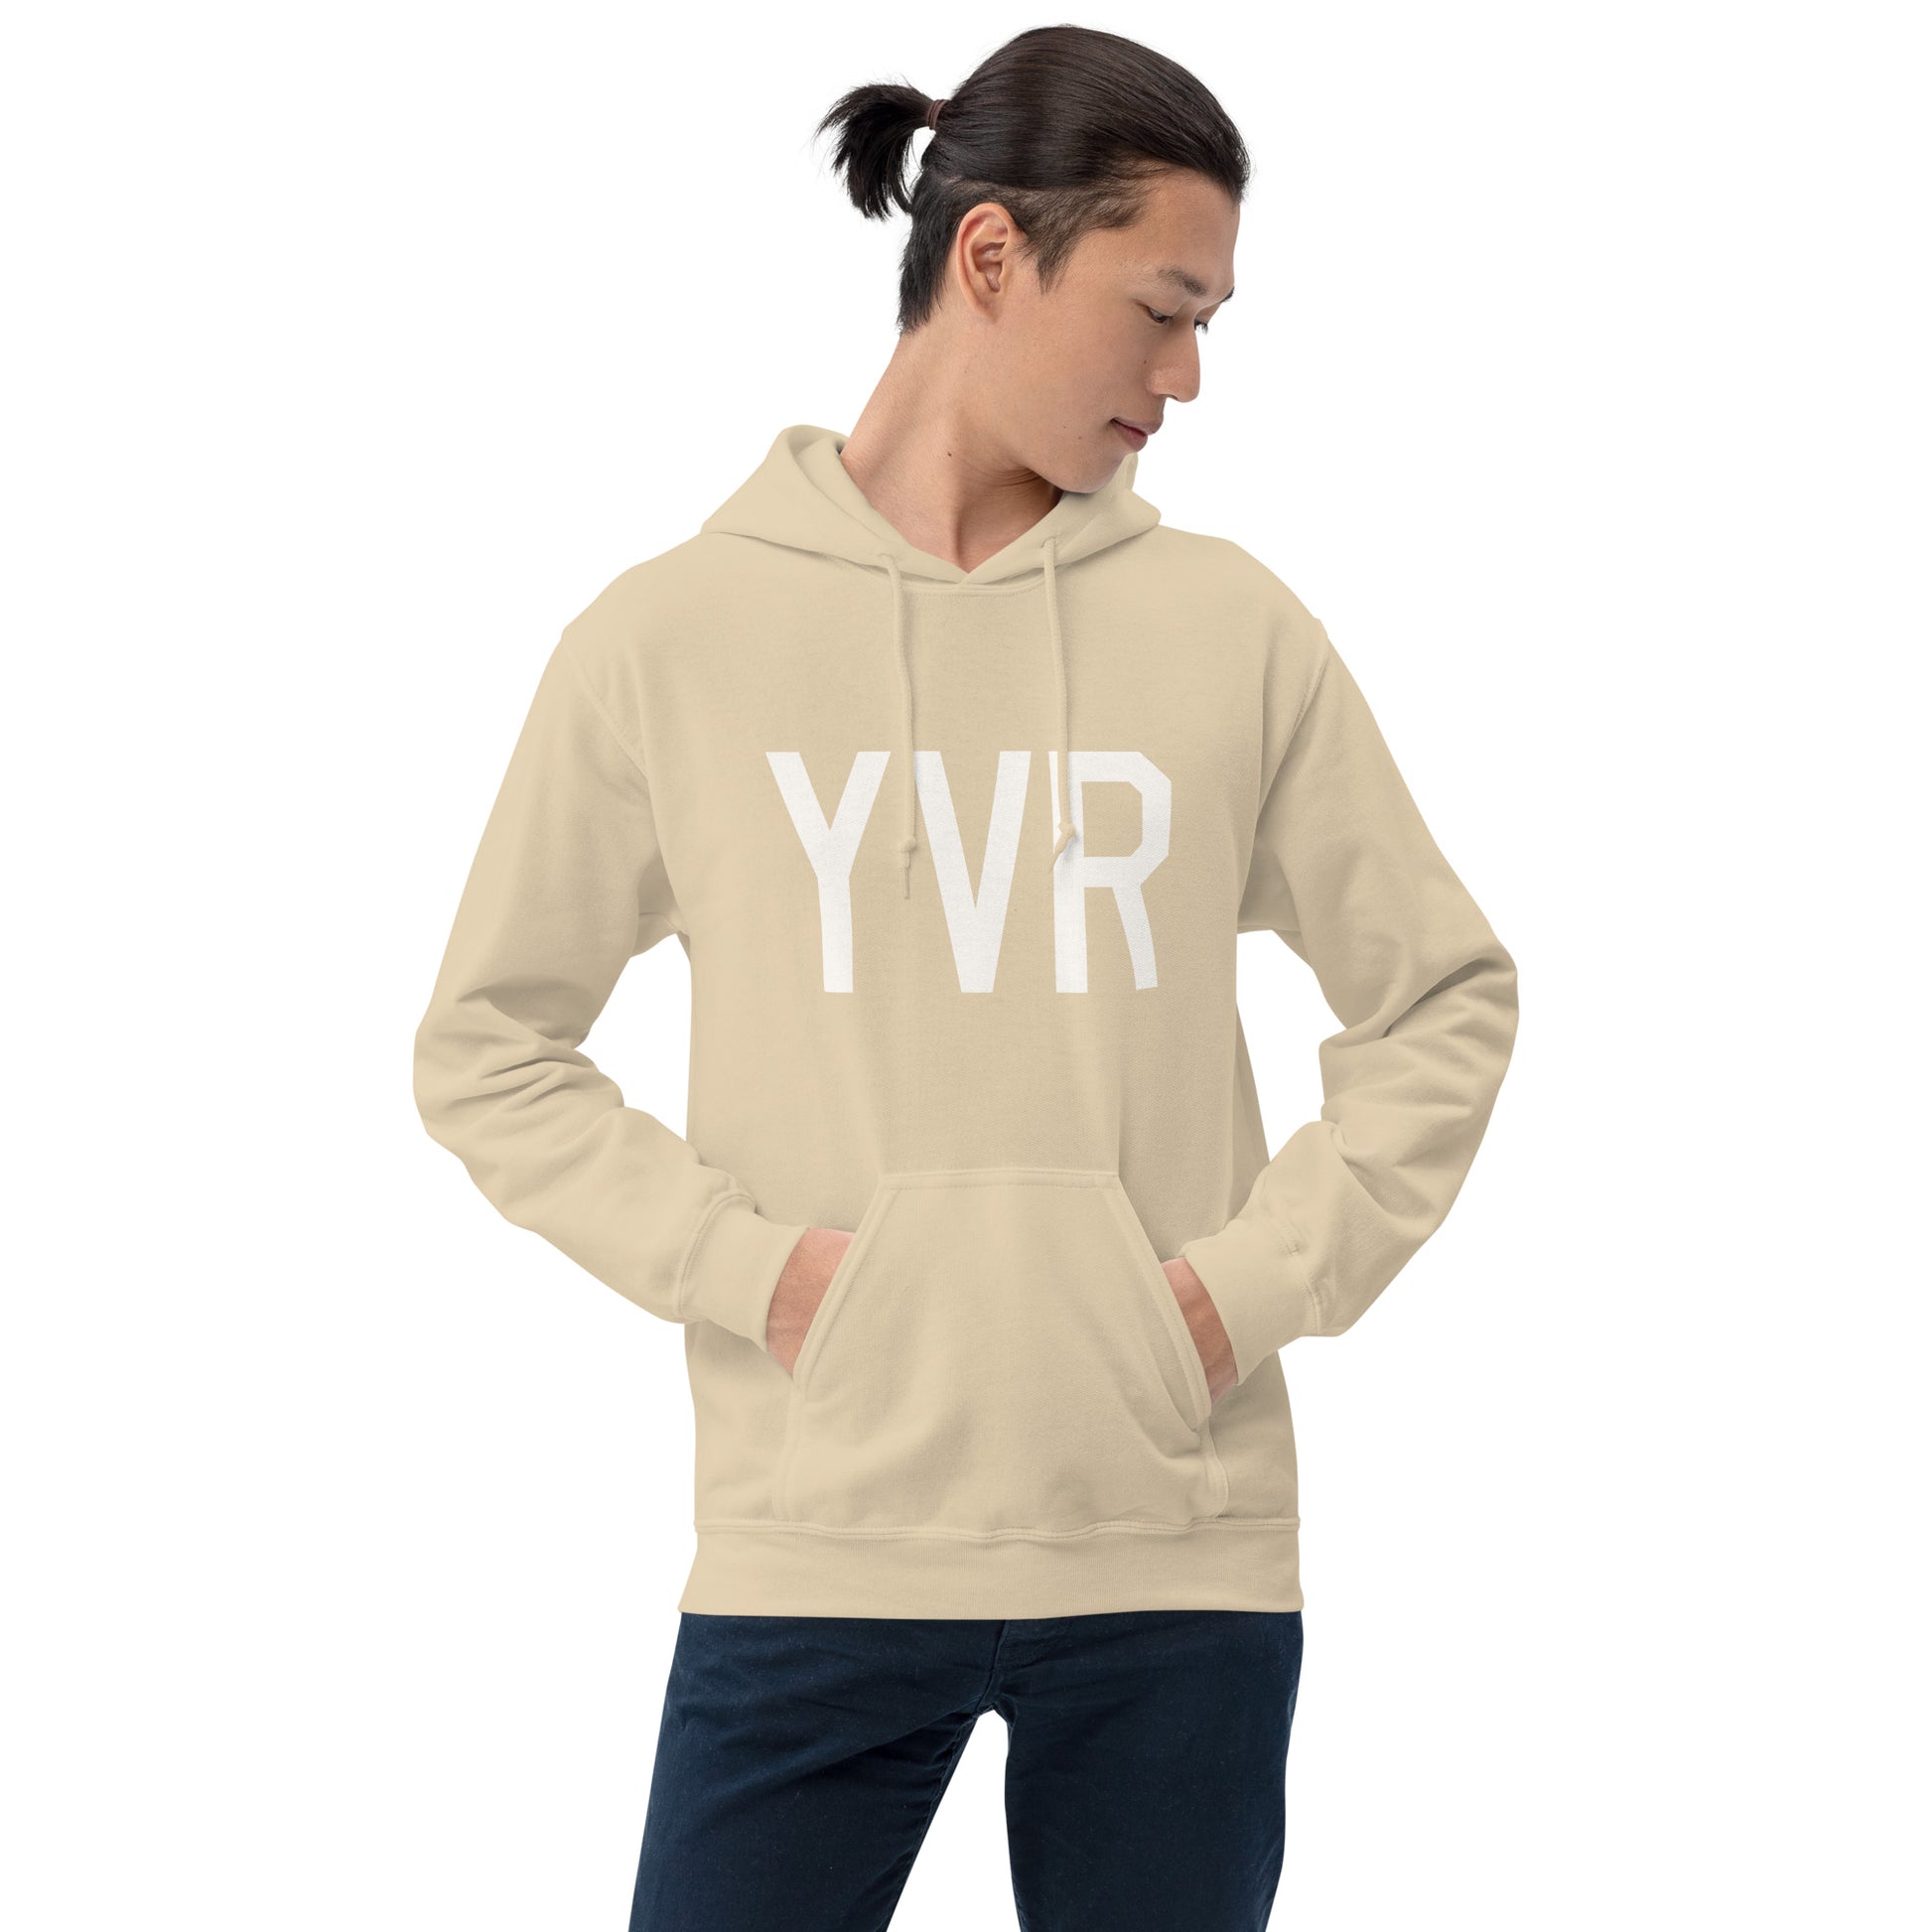 Unisex Hoodie - White Graphic • YVR Vancouver • YHM Designs - Image 01